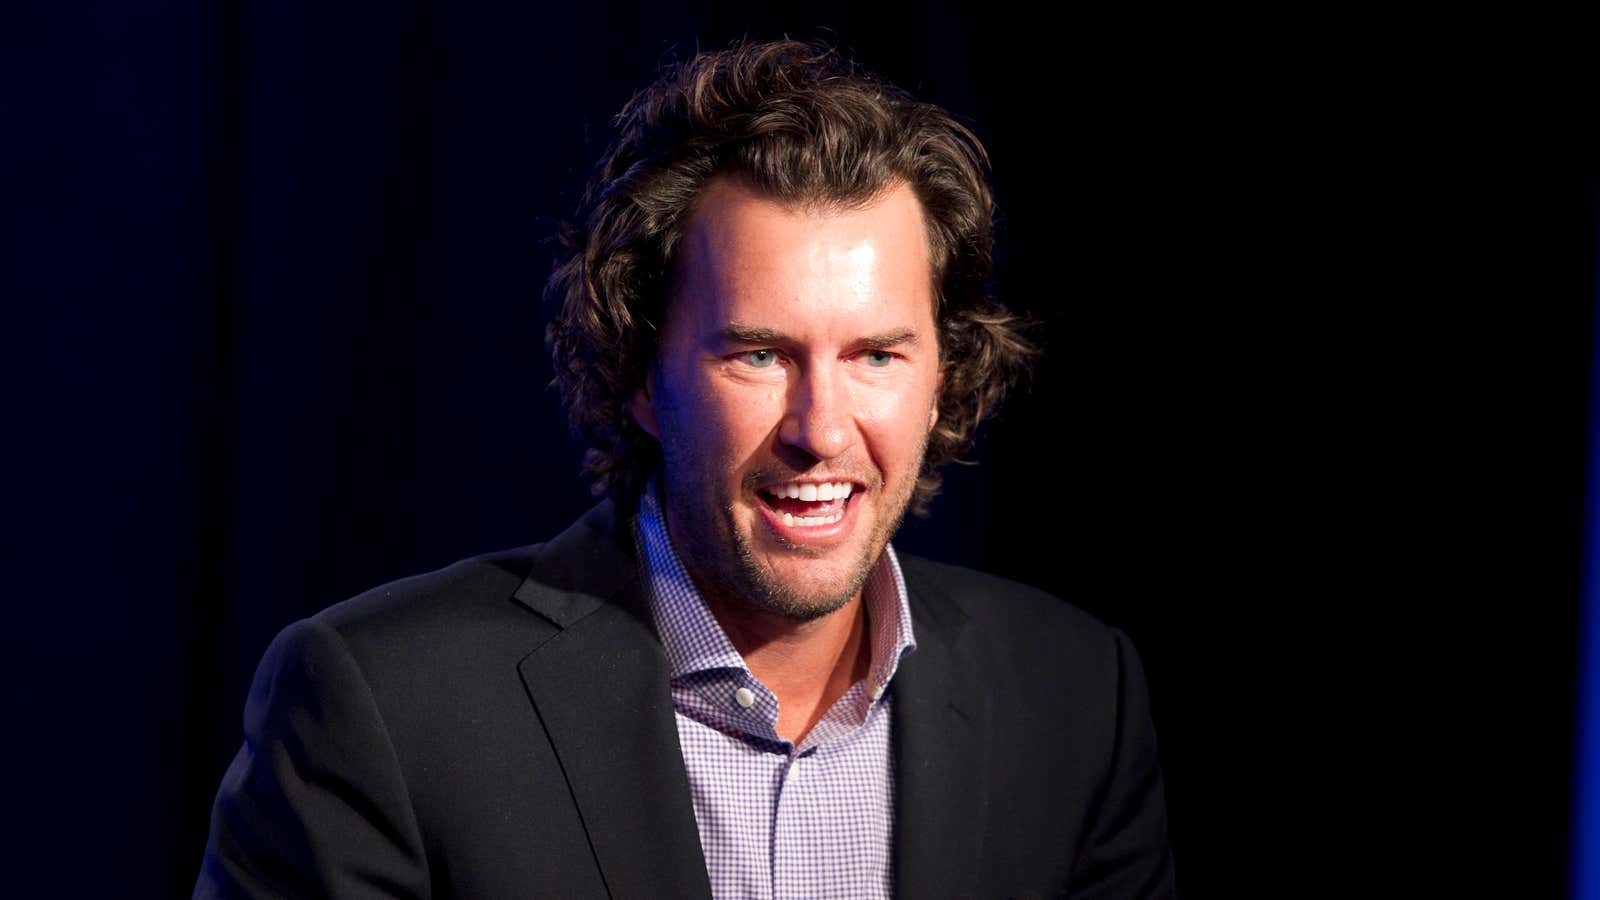 Toms founder Blake Mycoskie already knows all this.